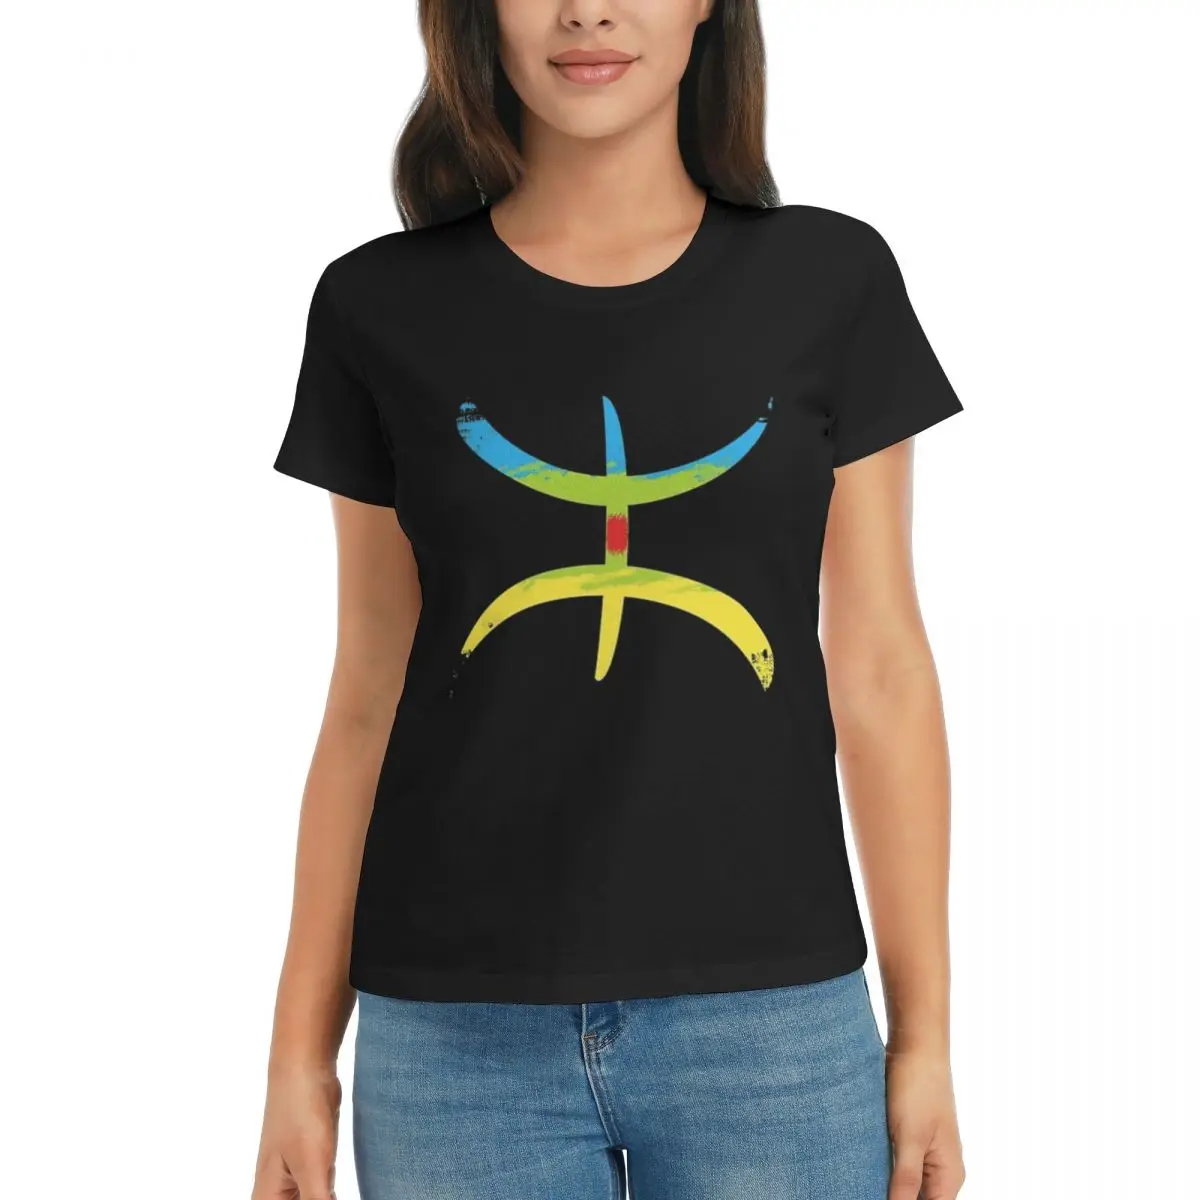 

Berber Flag - Amazigh Flag - YAZ Graphic Berber Amazigh Flag Campaign Top quality Black Tees Activity competition Eur Size